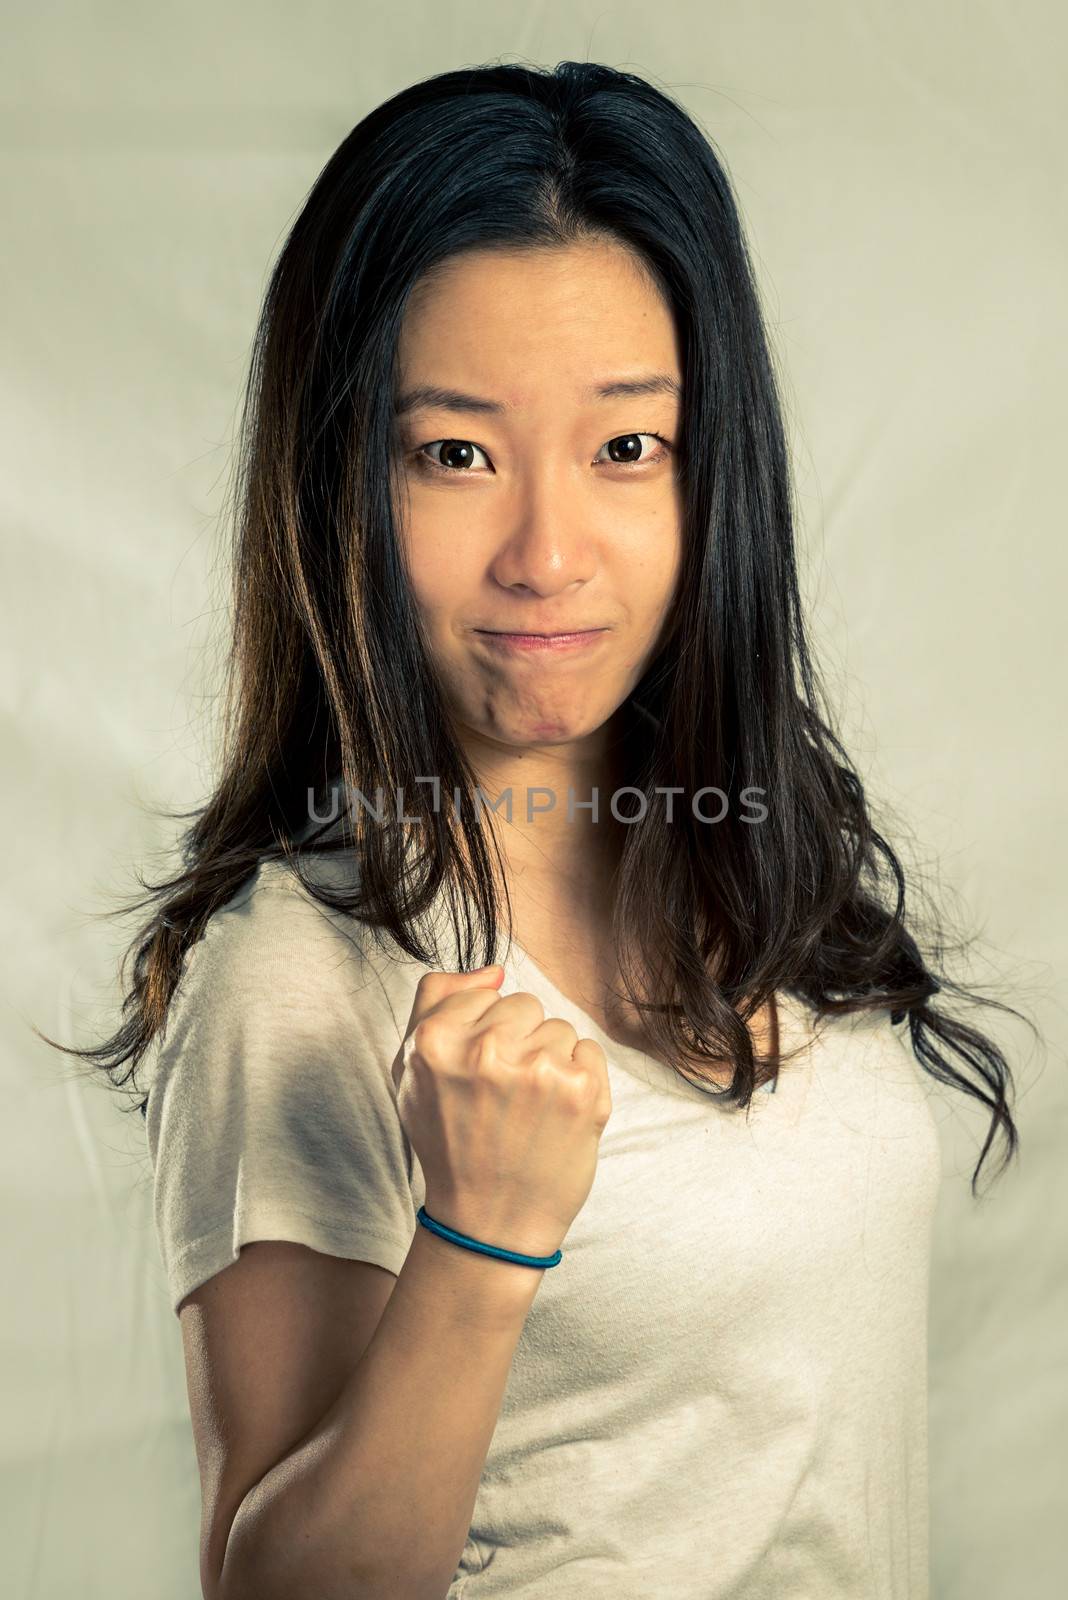 Young woman clenching her fist by IVYPHOTOS